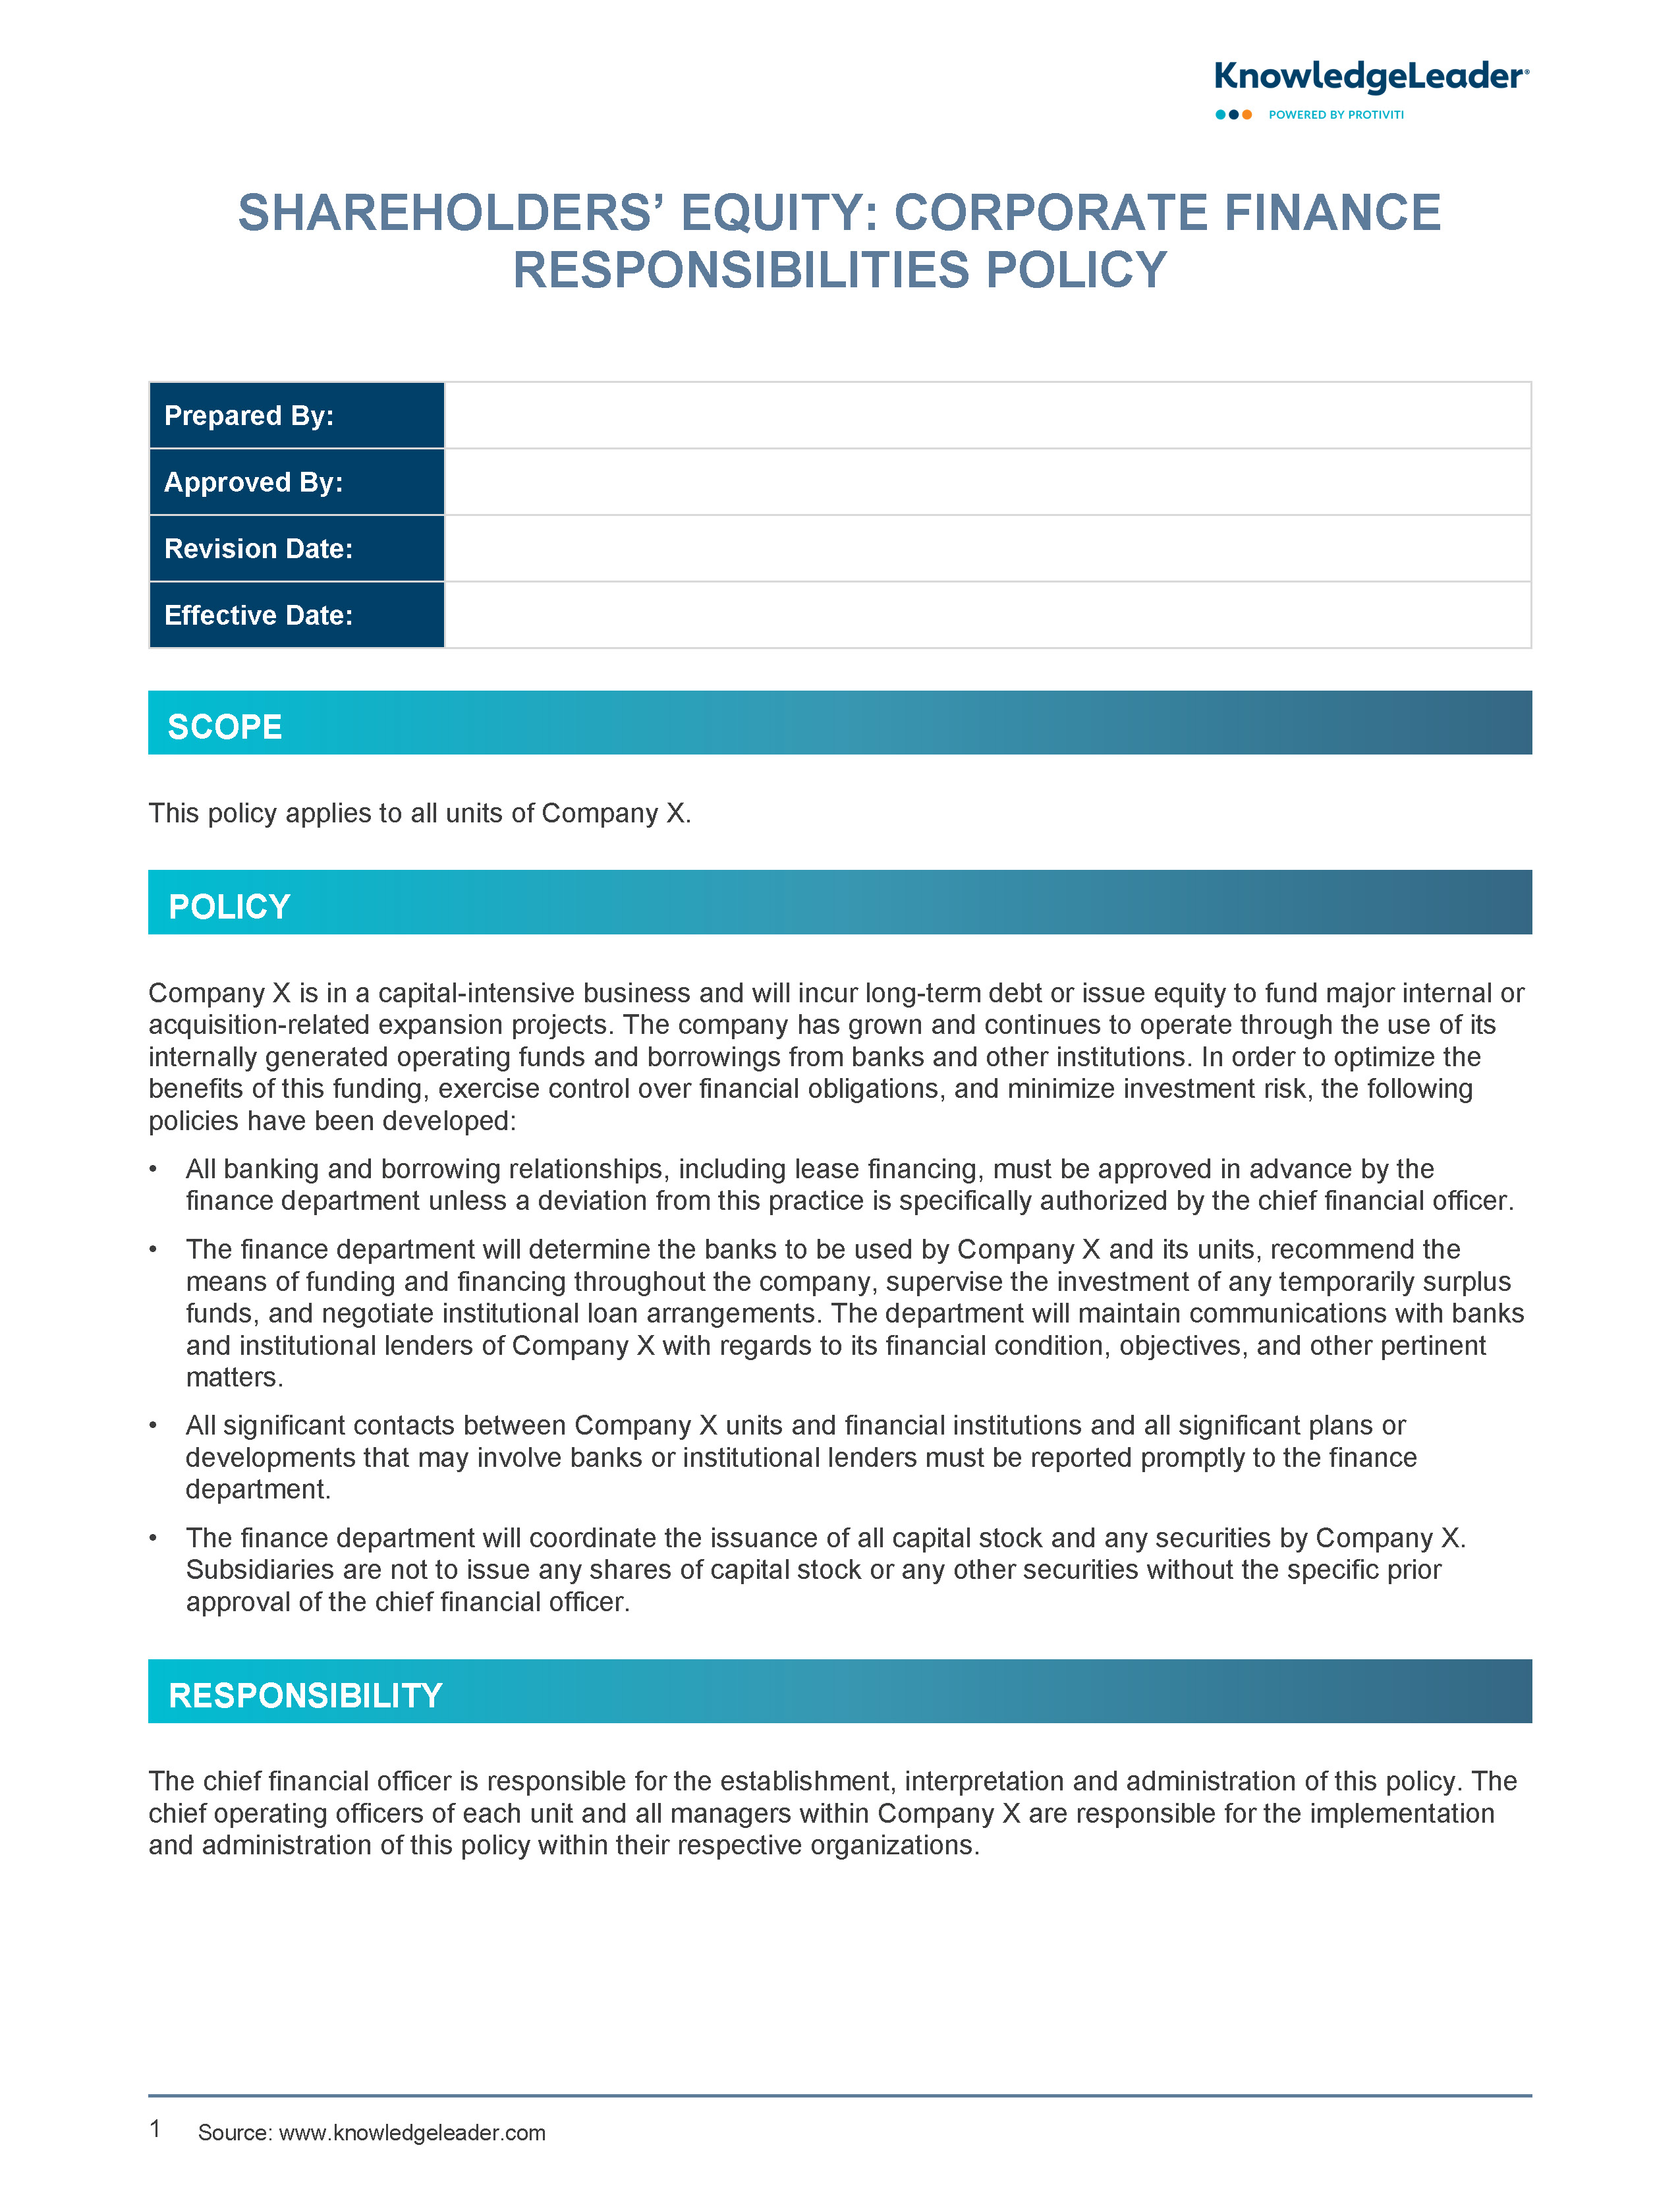 Screenshot of the first page of Shareholders' Equity Corporate Finance Responsibilities - Policy